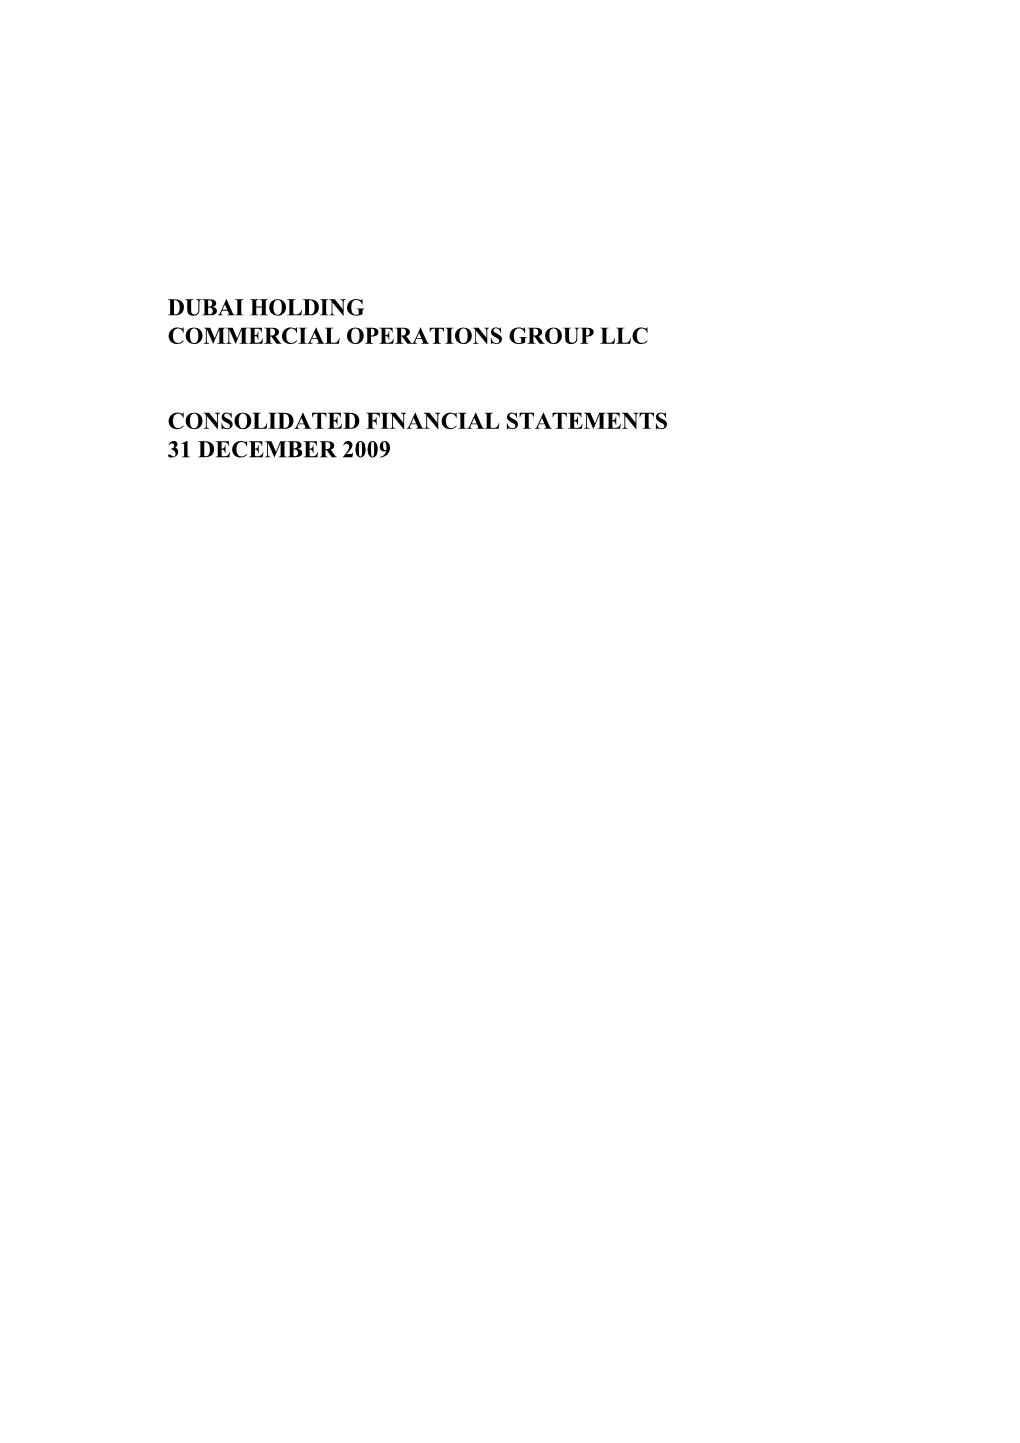 Dubai Holding Commercial Operations Group Llc Consolidated Financial Statements 31 December 2009